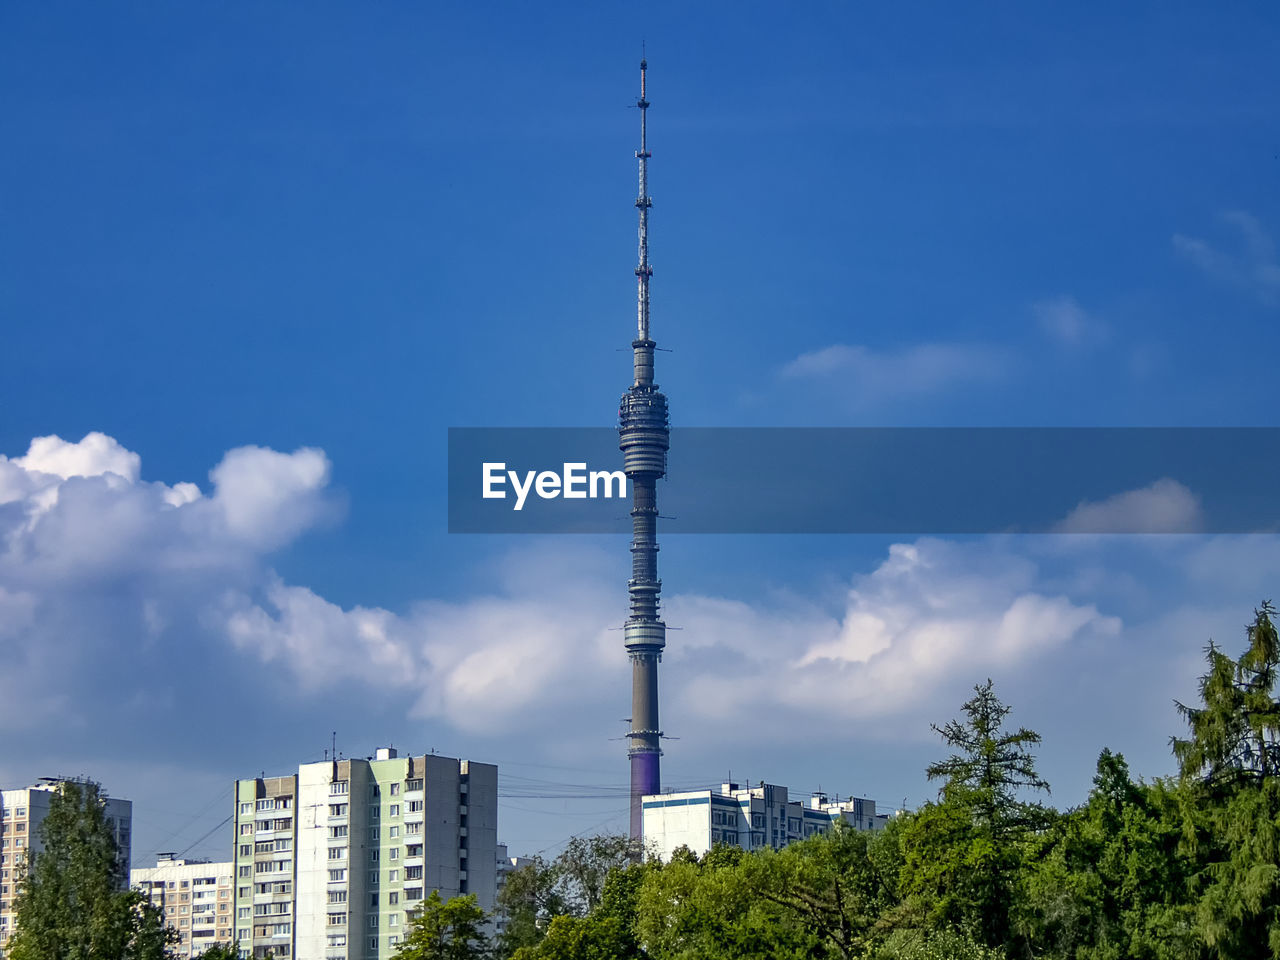 The ostankino tower is a television and radio transmitter in moscow, russia